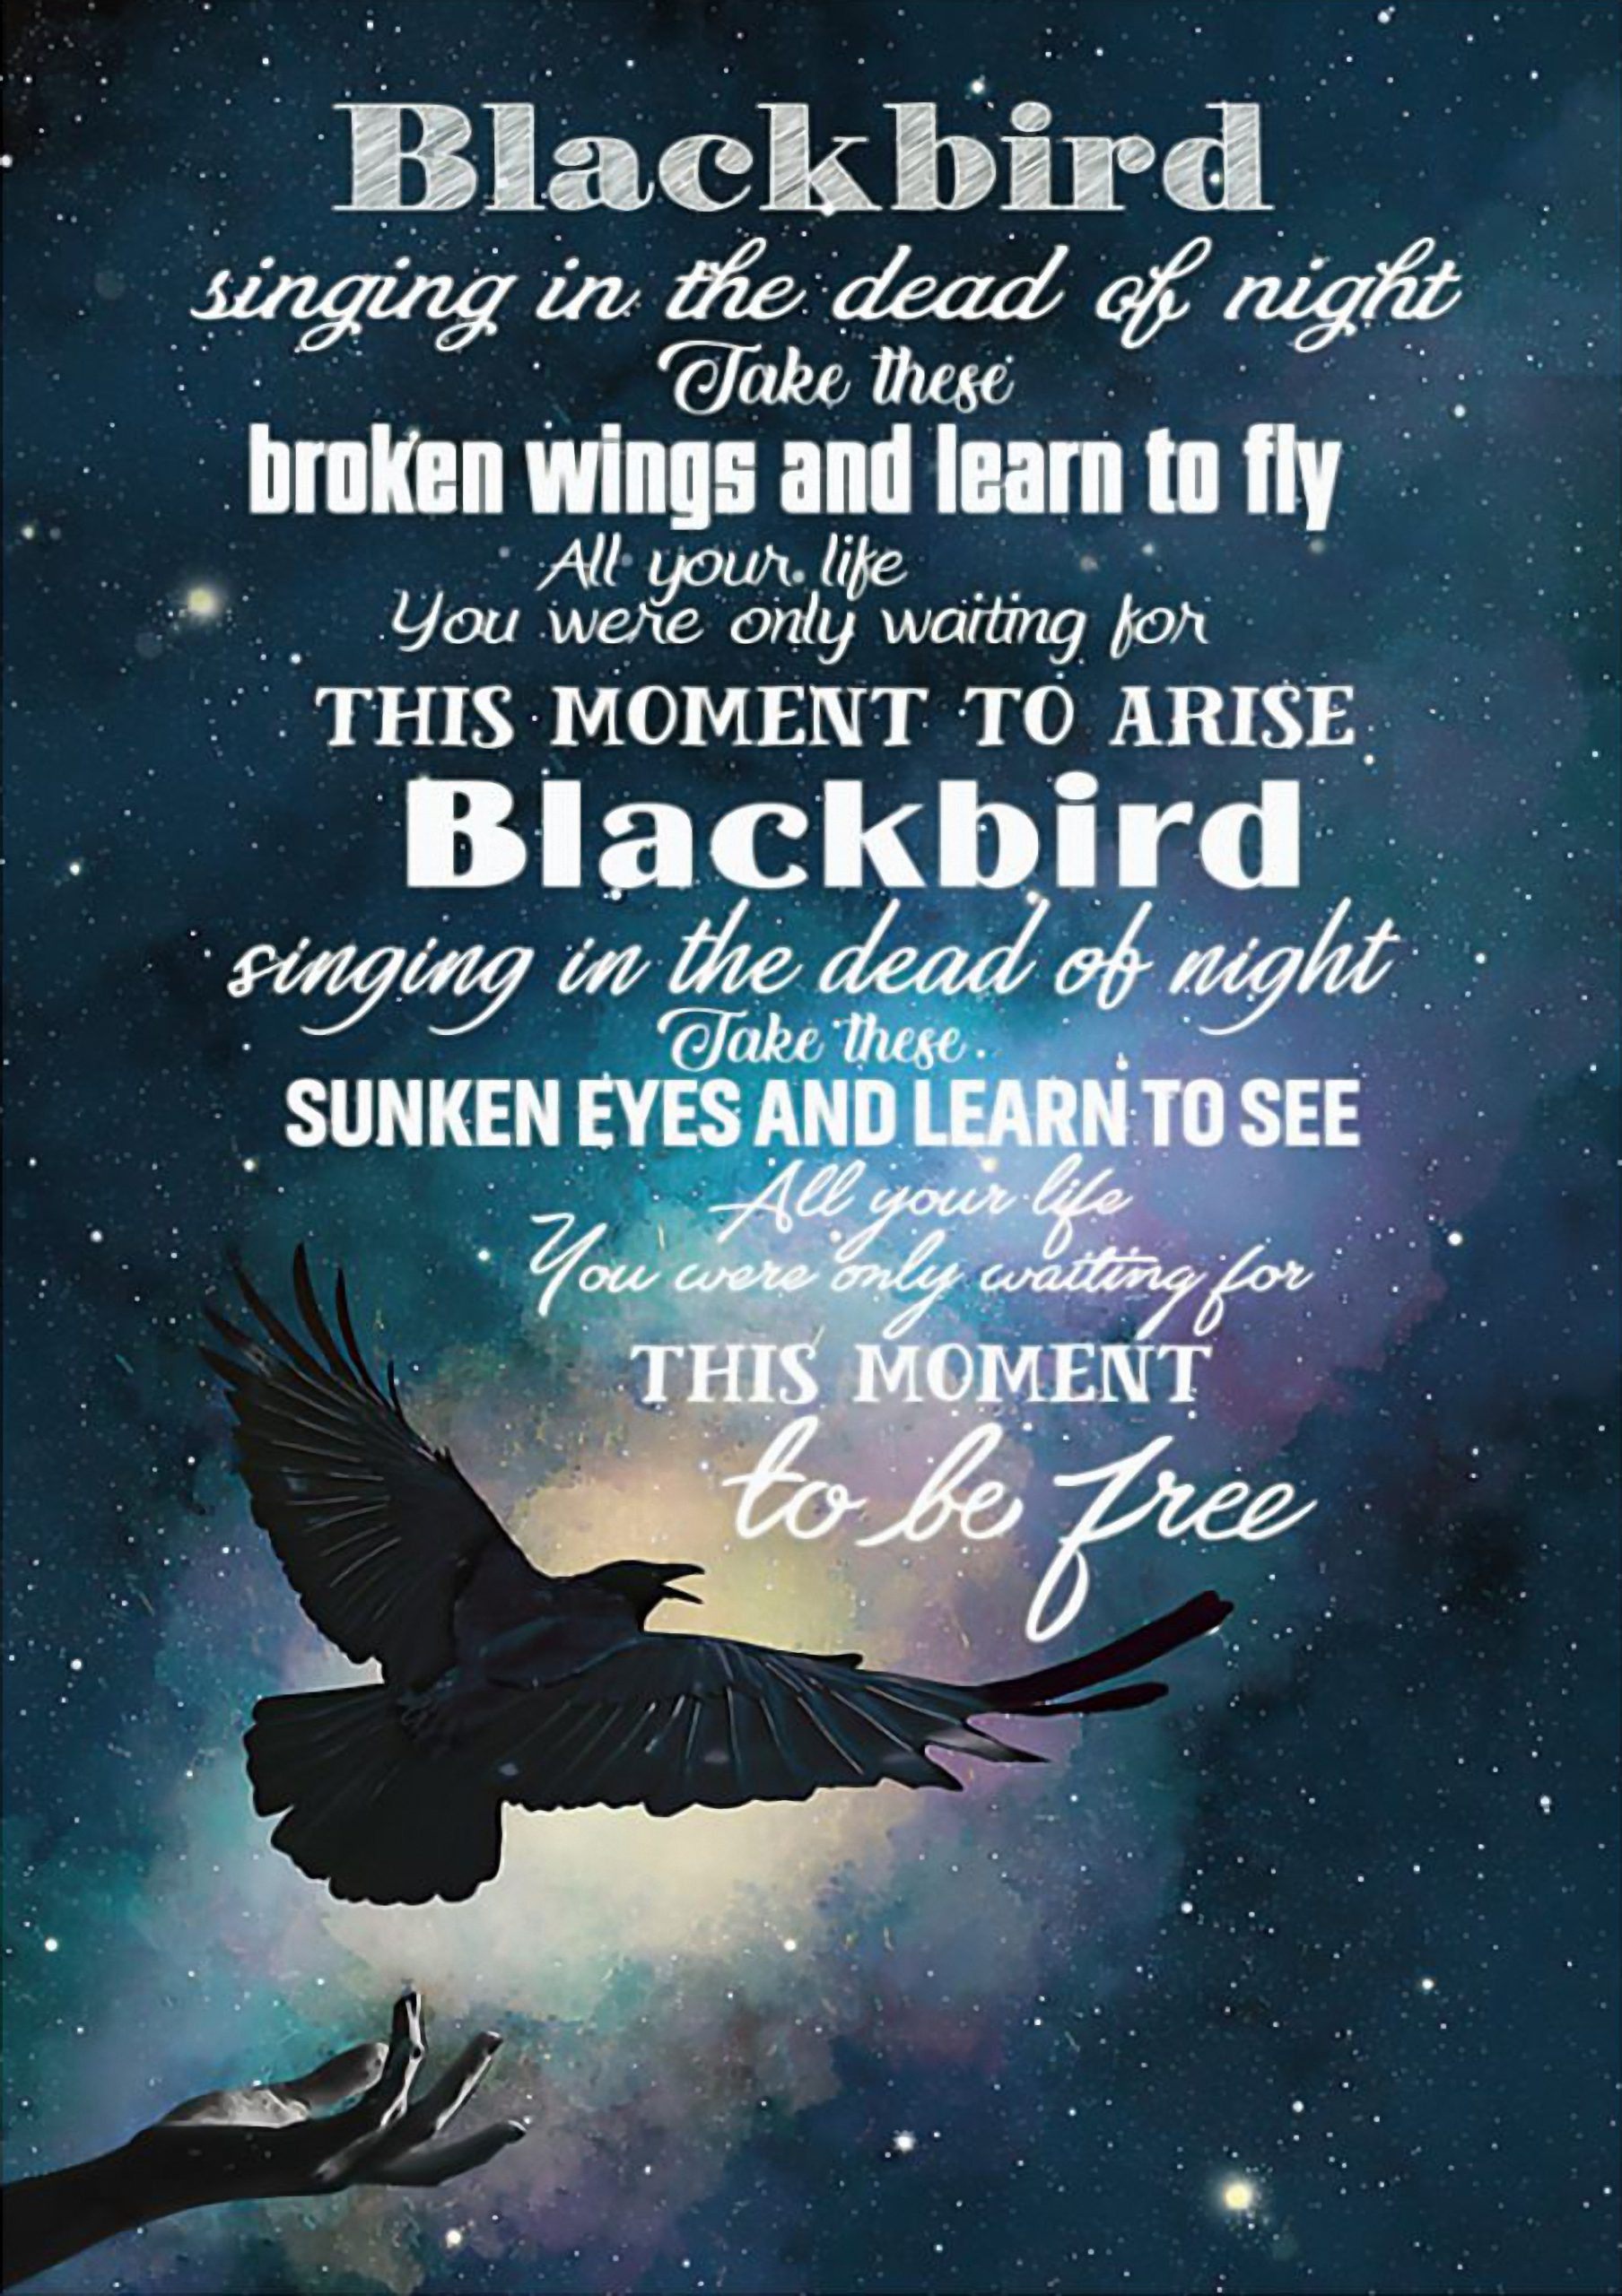 Blackbird singing in the dead of night Take these broken wings and learn to fly fleece posterz